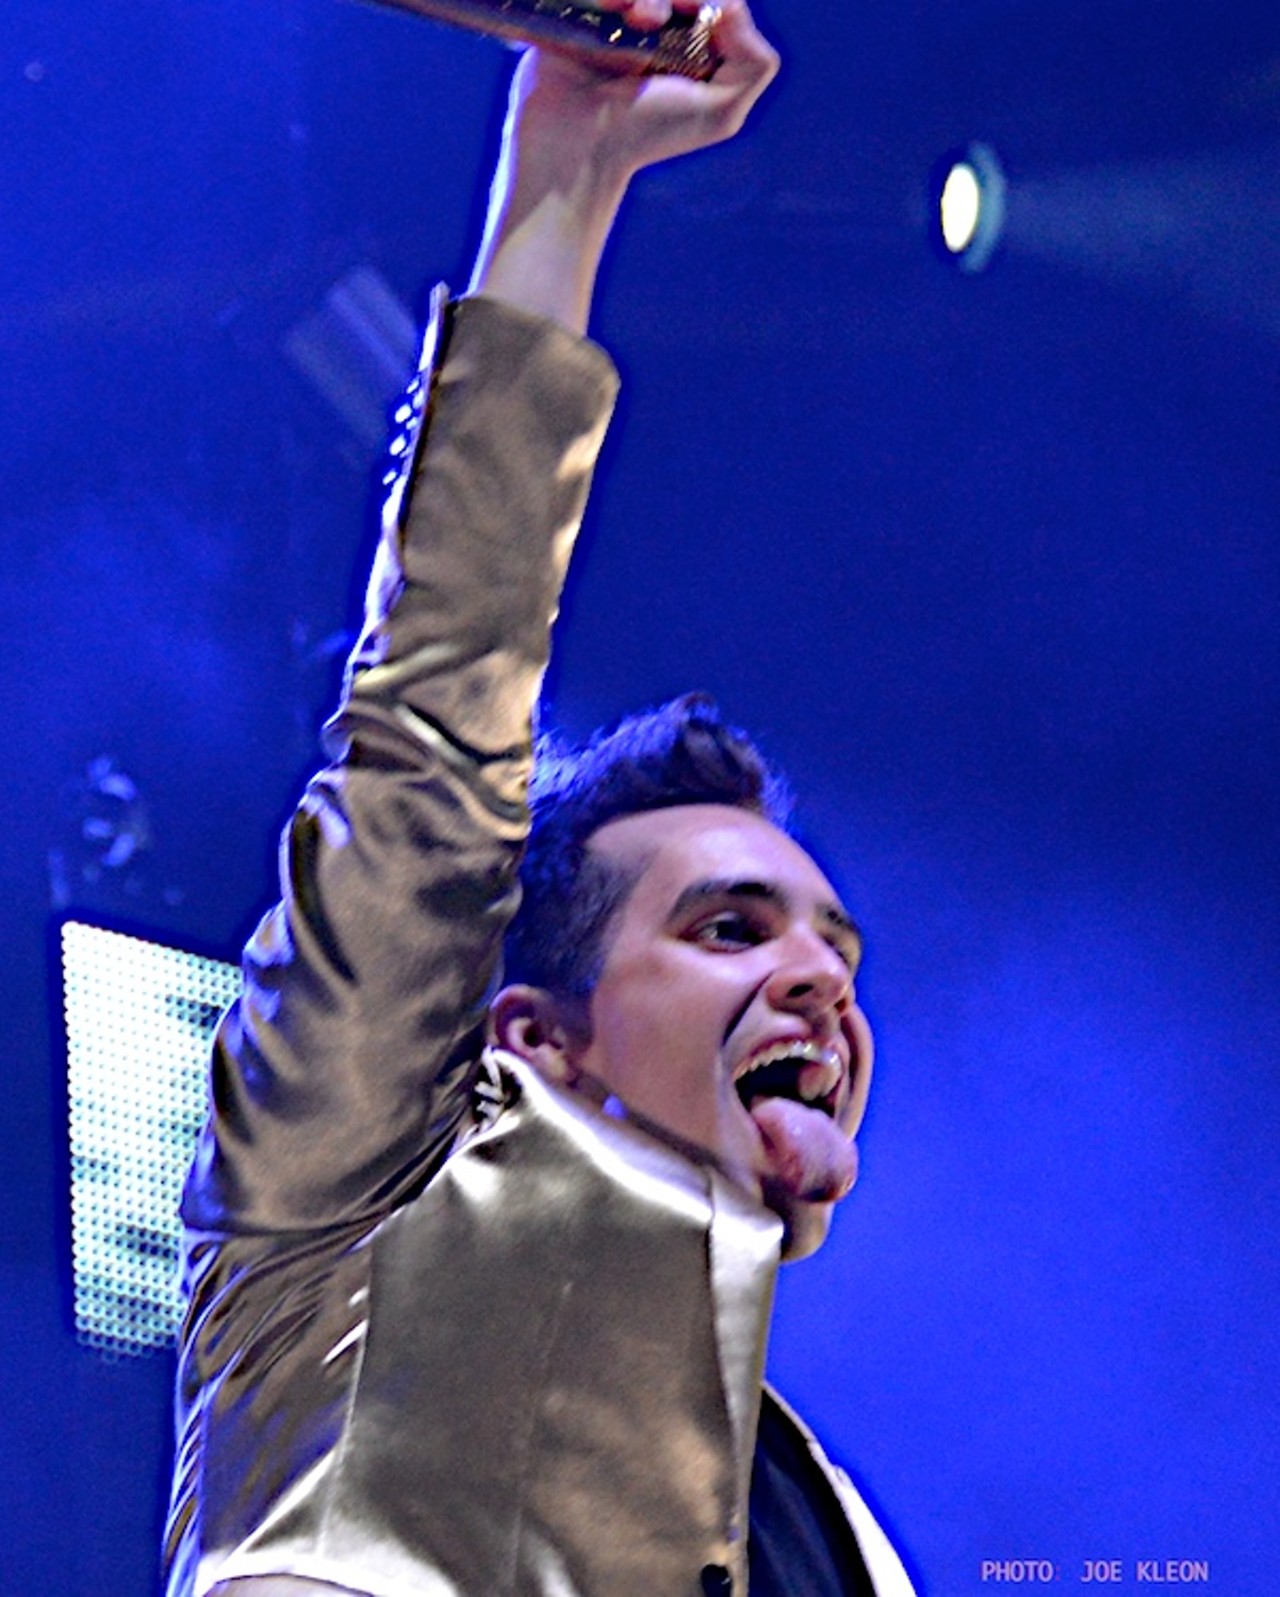 Panic! at the Disco Performing at Jacobs Pavilion at Nautica